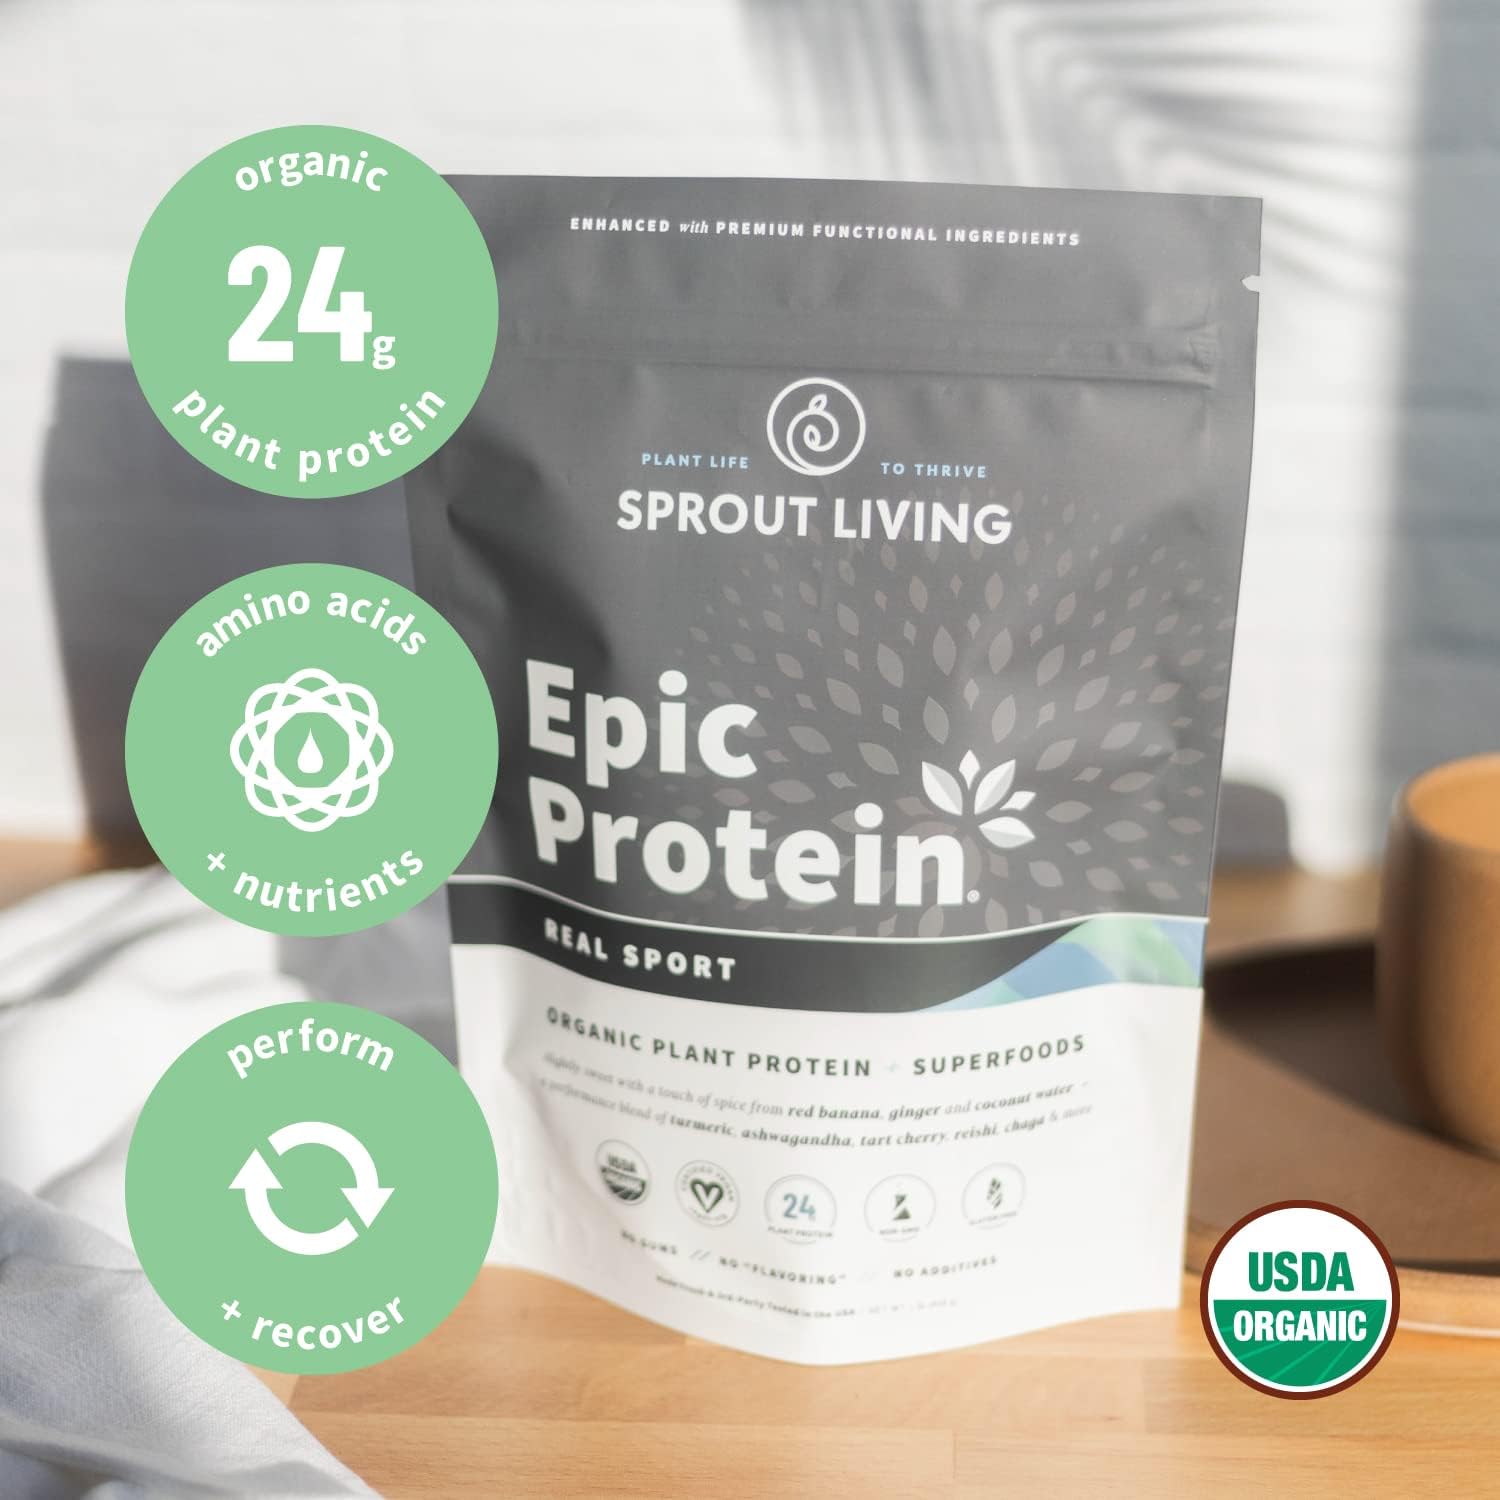 Sprout Living, Epic Protein, Plant Based Protein & Superfoods Powder, Real Sport | 24 Grams Organic Protein Powder, Recovery, Vegan, Non Dairy, Non-GMO, Gluten Free, Low Sugar (1 Pound, 12 Servings) : Health & Household